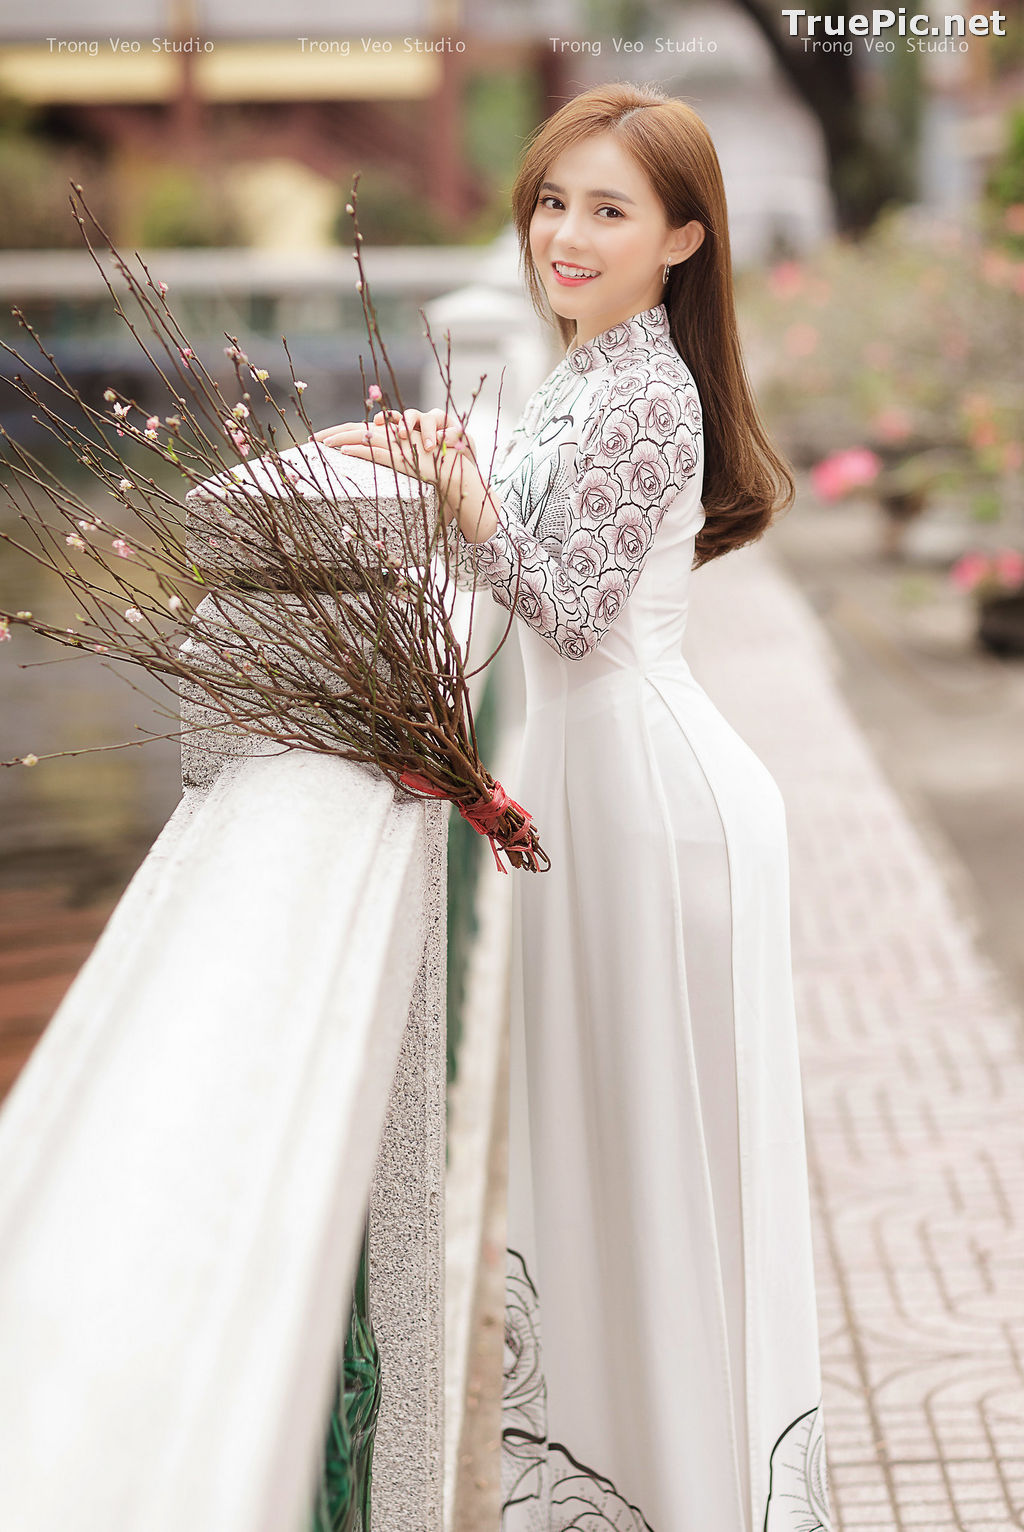 Image The Beauty of Vietnamese Girls with Traditional Dress (Ao Dai) #4 - TruePic.net - Picture-61